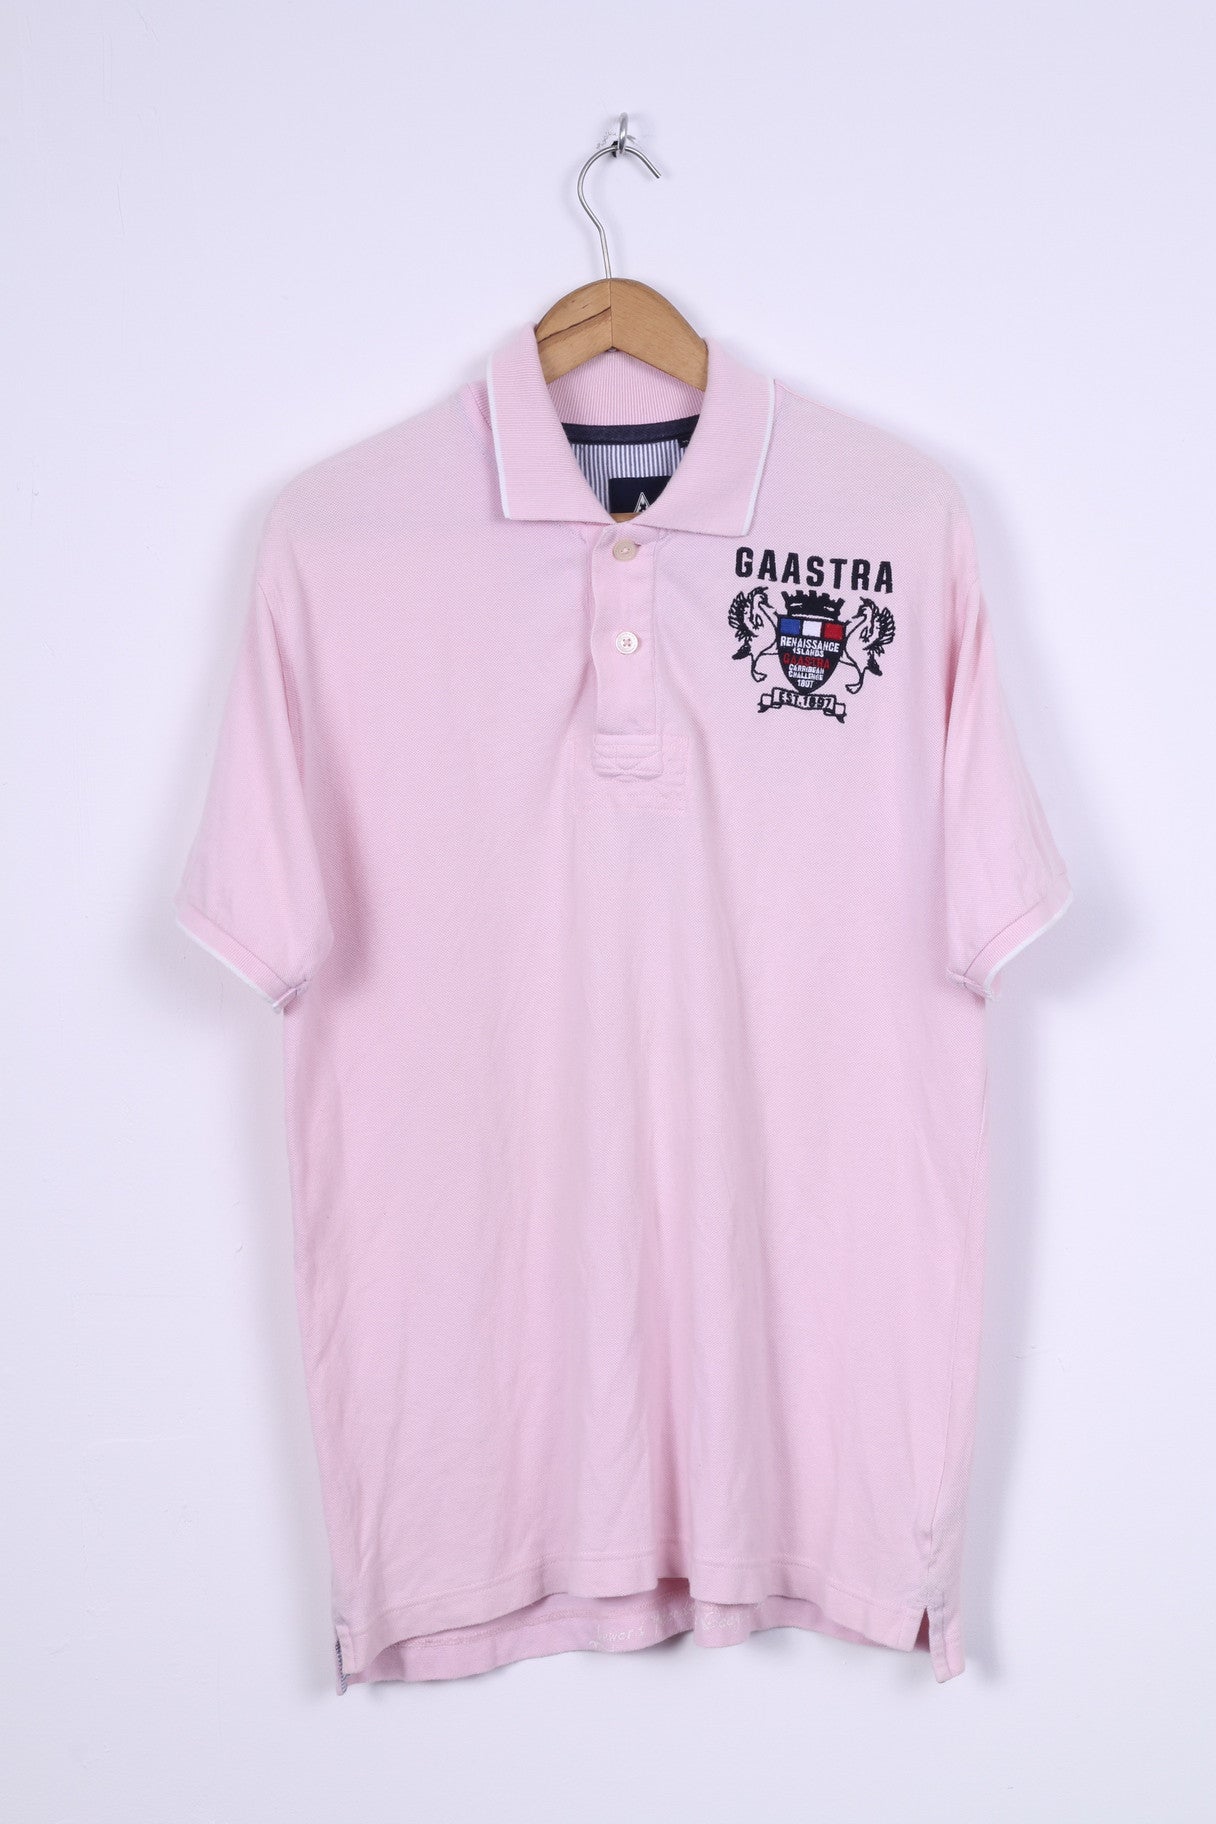 Gaastra Mens XL Polo Shirt Pink Cotton Renaissance Islands Embroidered Detailed Buttons